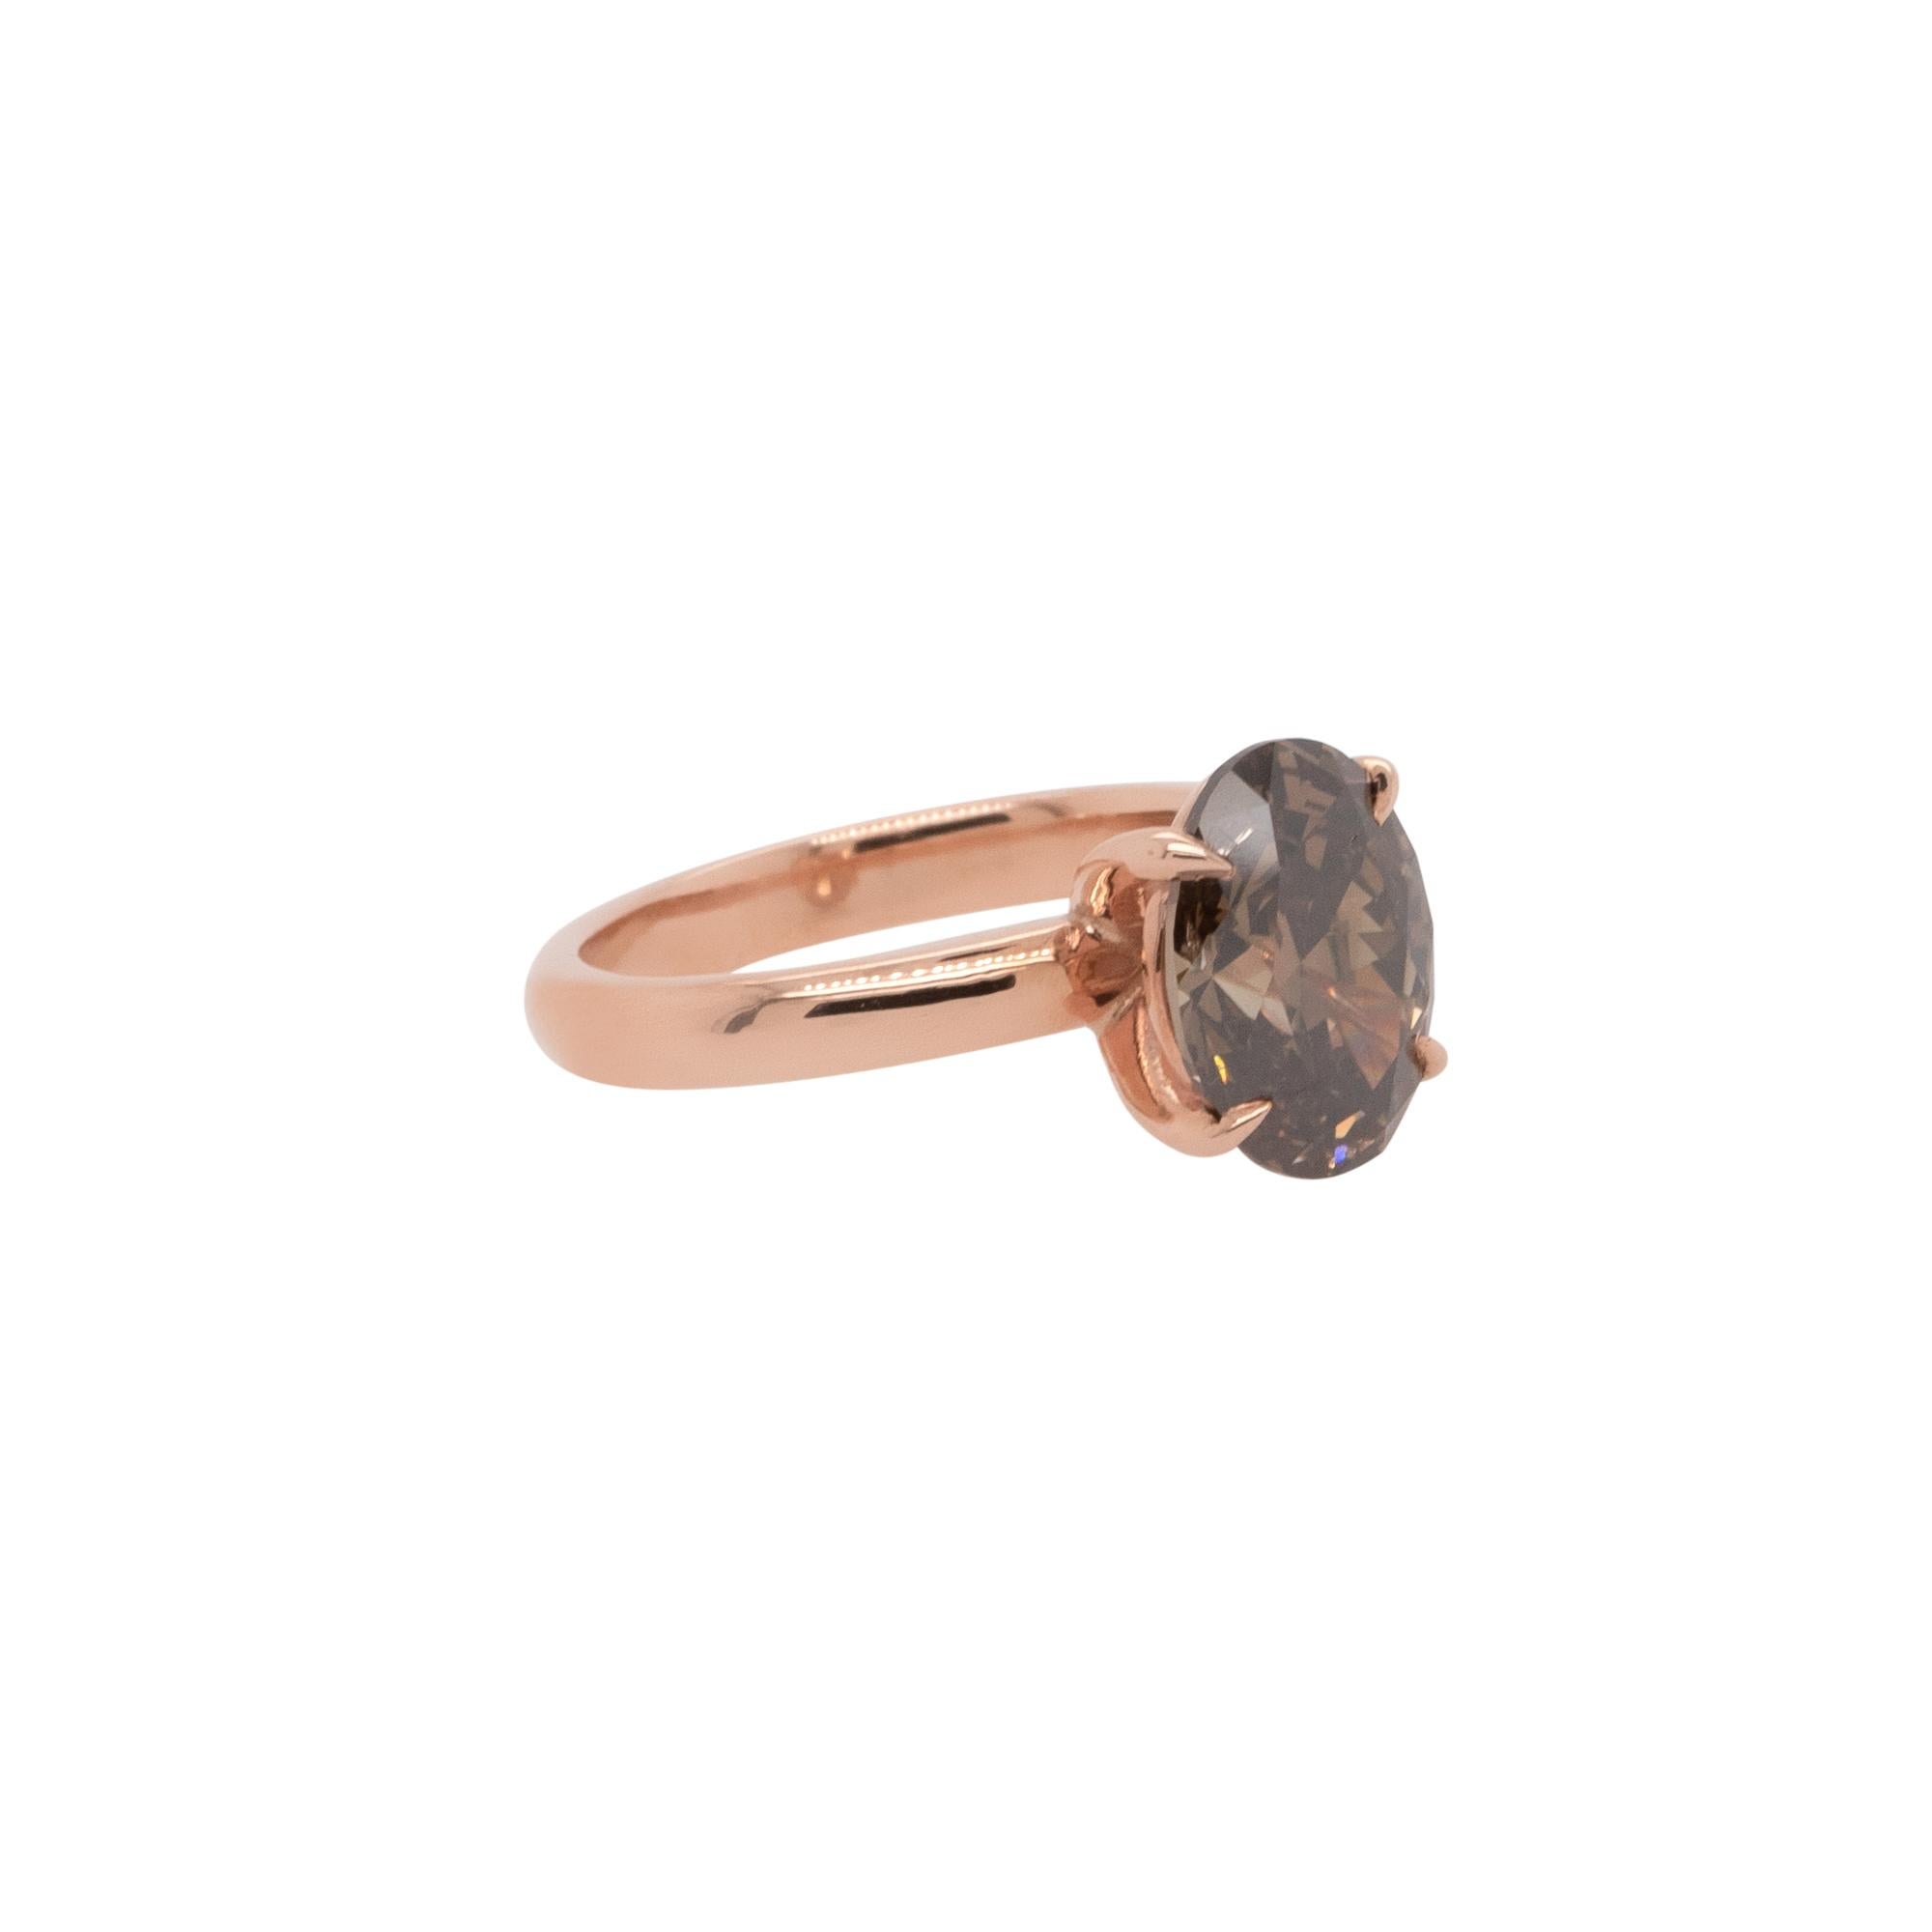 3.30 Carat Natural Oval Cut Fancy Brown Diamond Solitaire Ring In New Condition For Sale In Boca Raton, FL